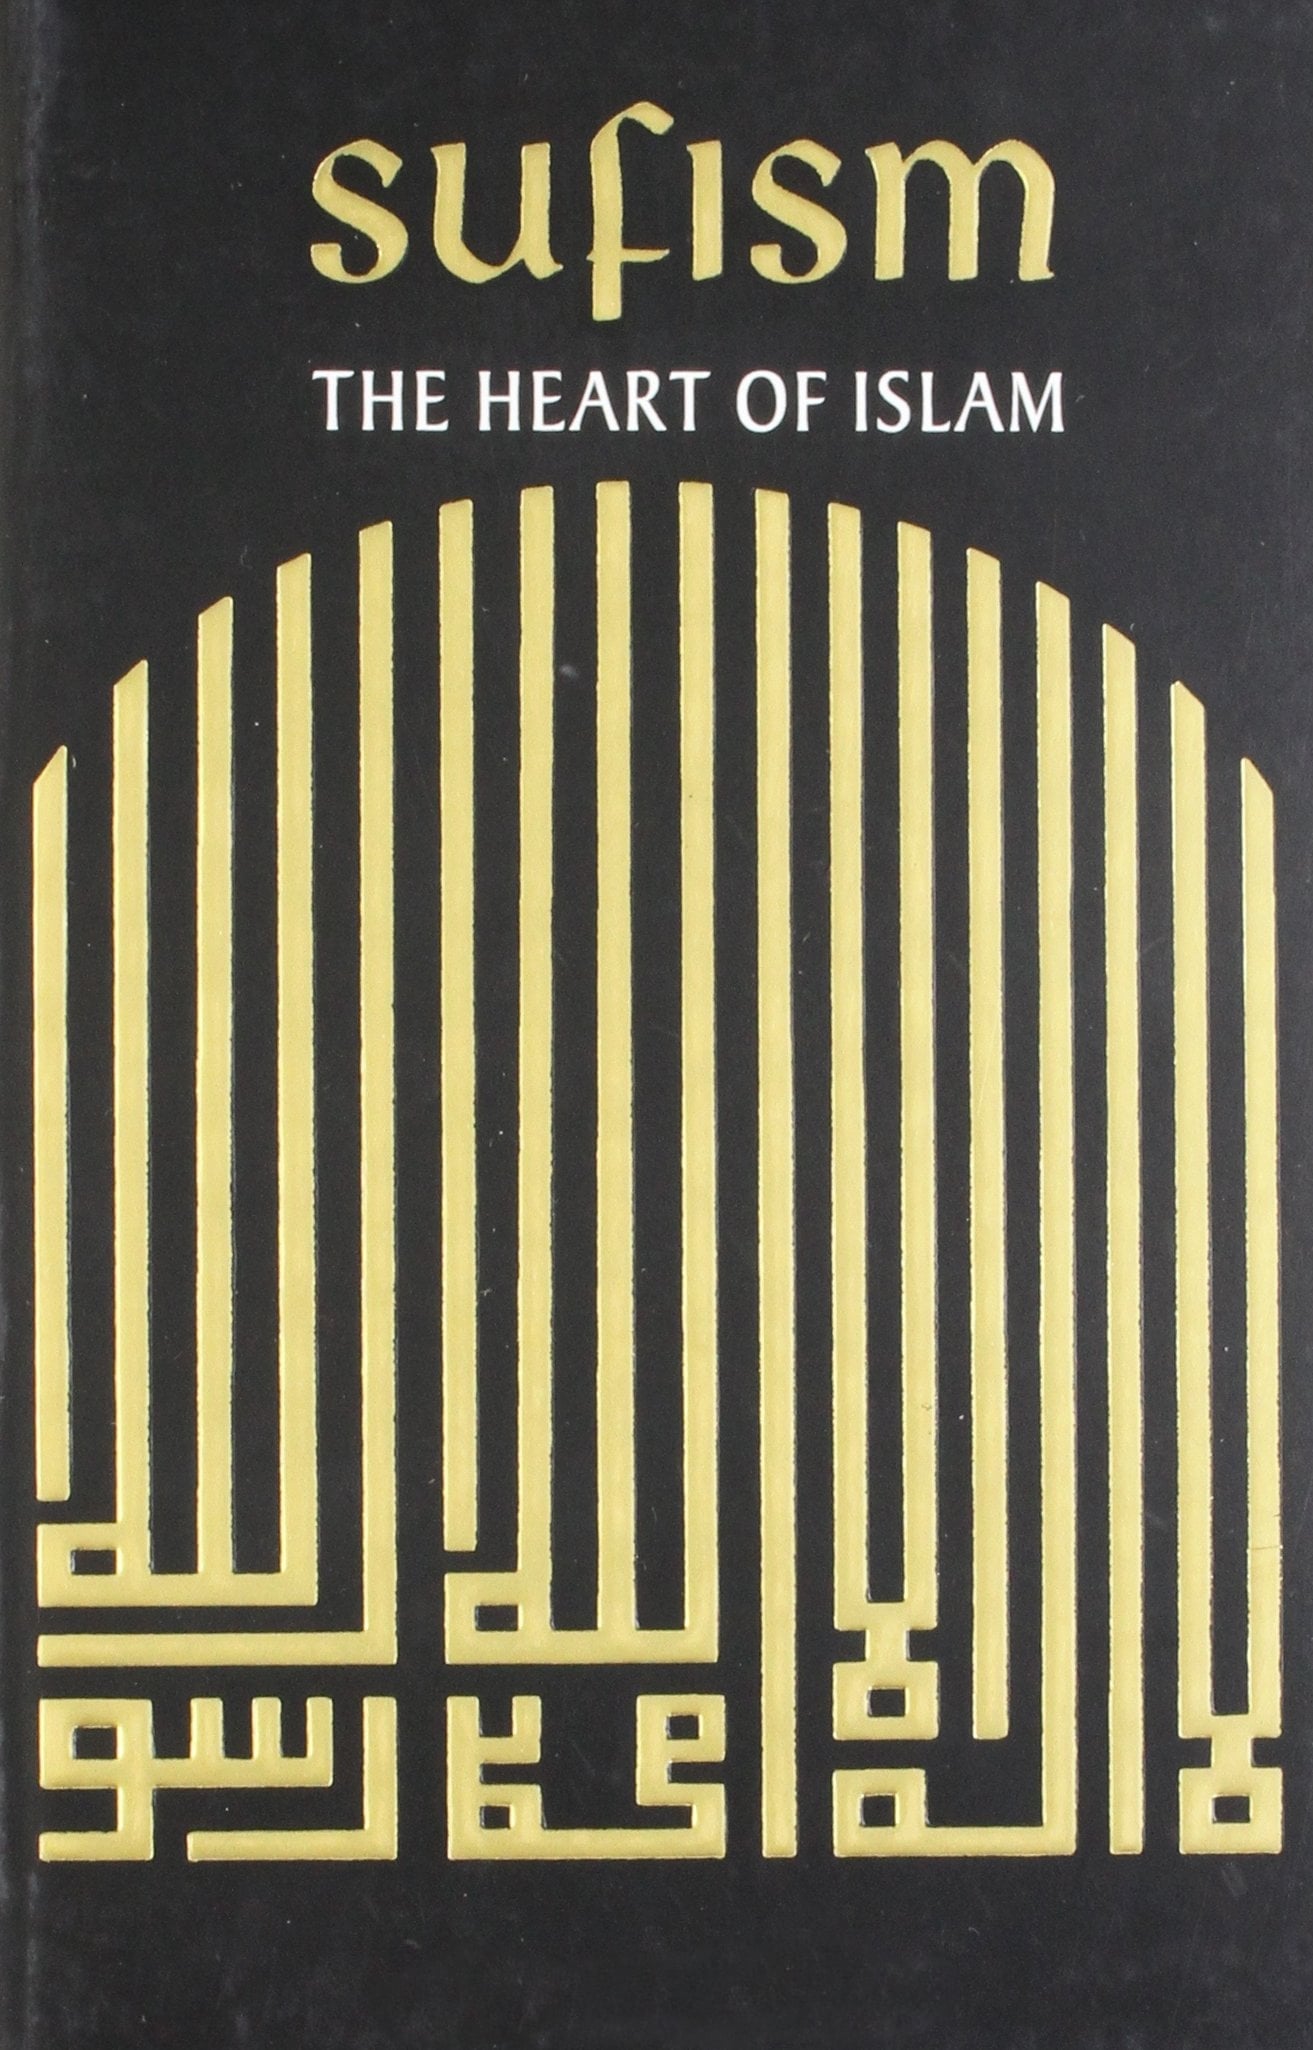 Sufism: The Heart of Islam